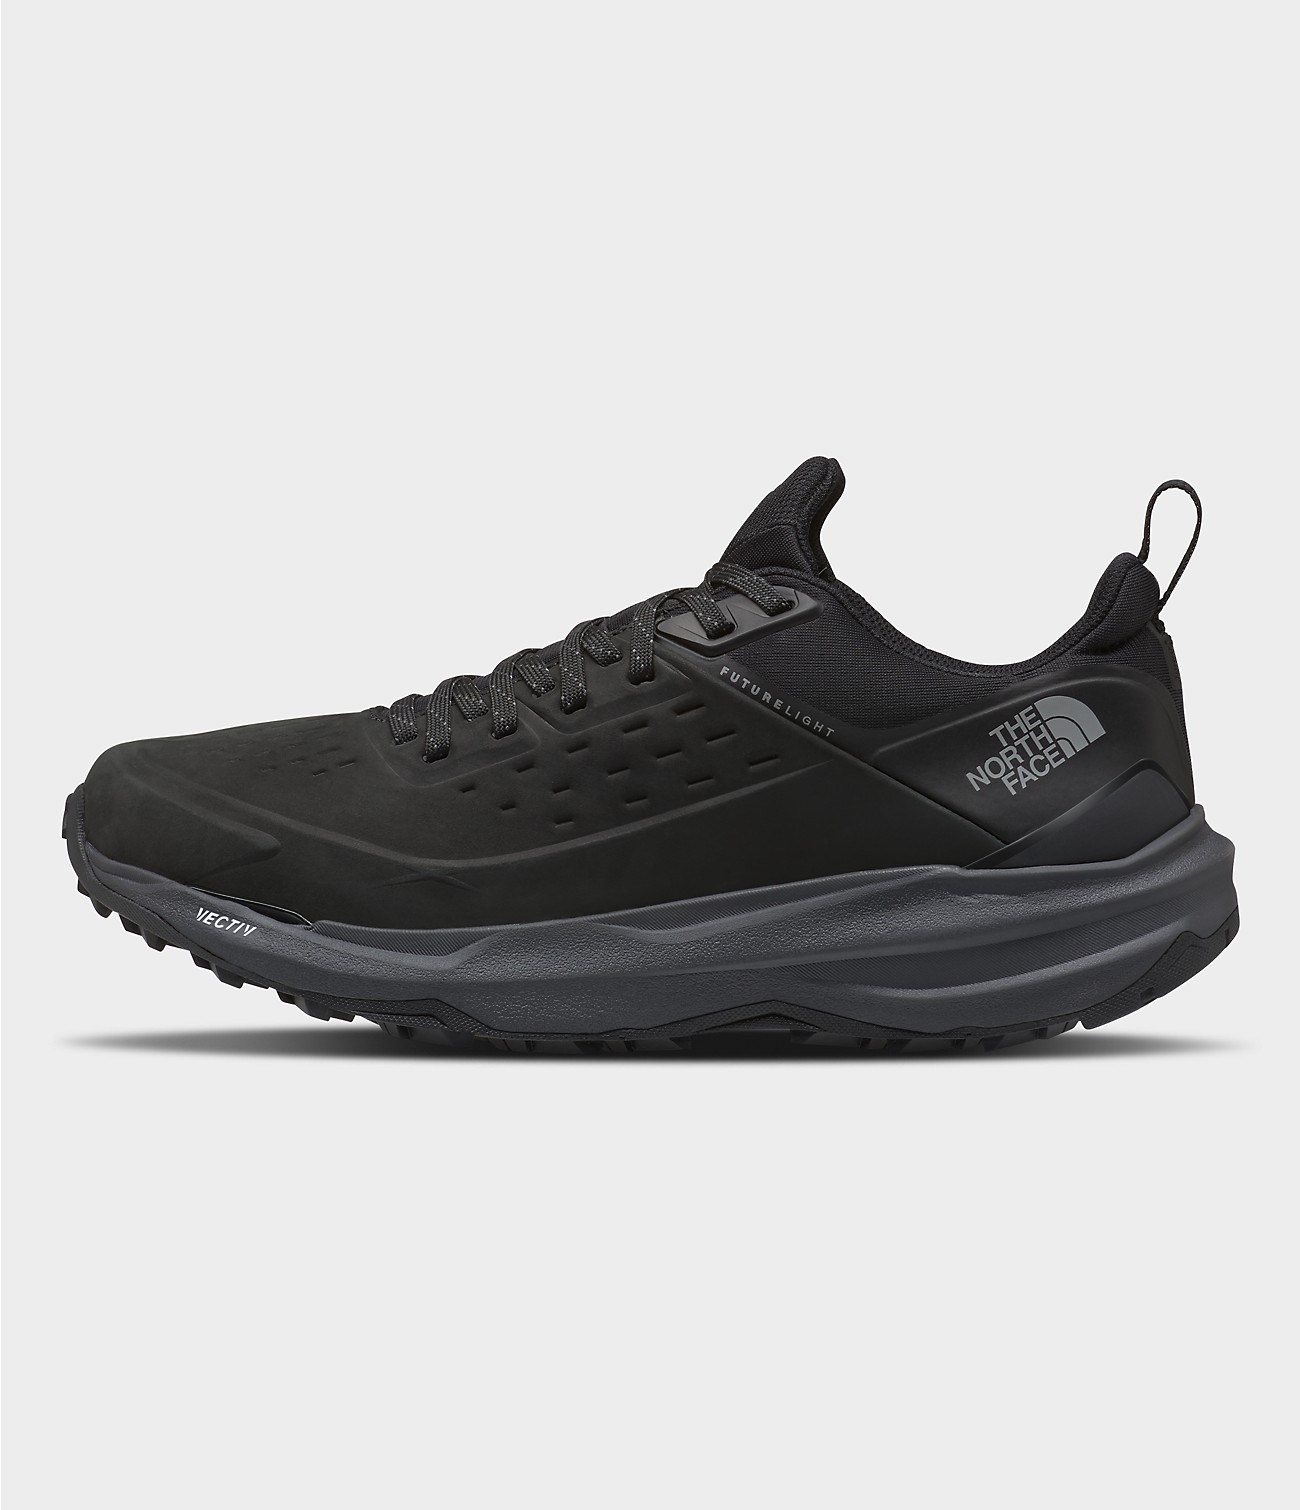 Unlock Wilderness' choice in the Merrell Vs North Face comparison, the VECTIV Exploris 2 FUTURELIGHT™ Leather Shoes by The North Face